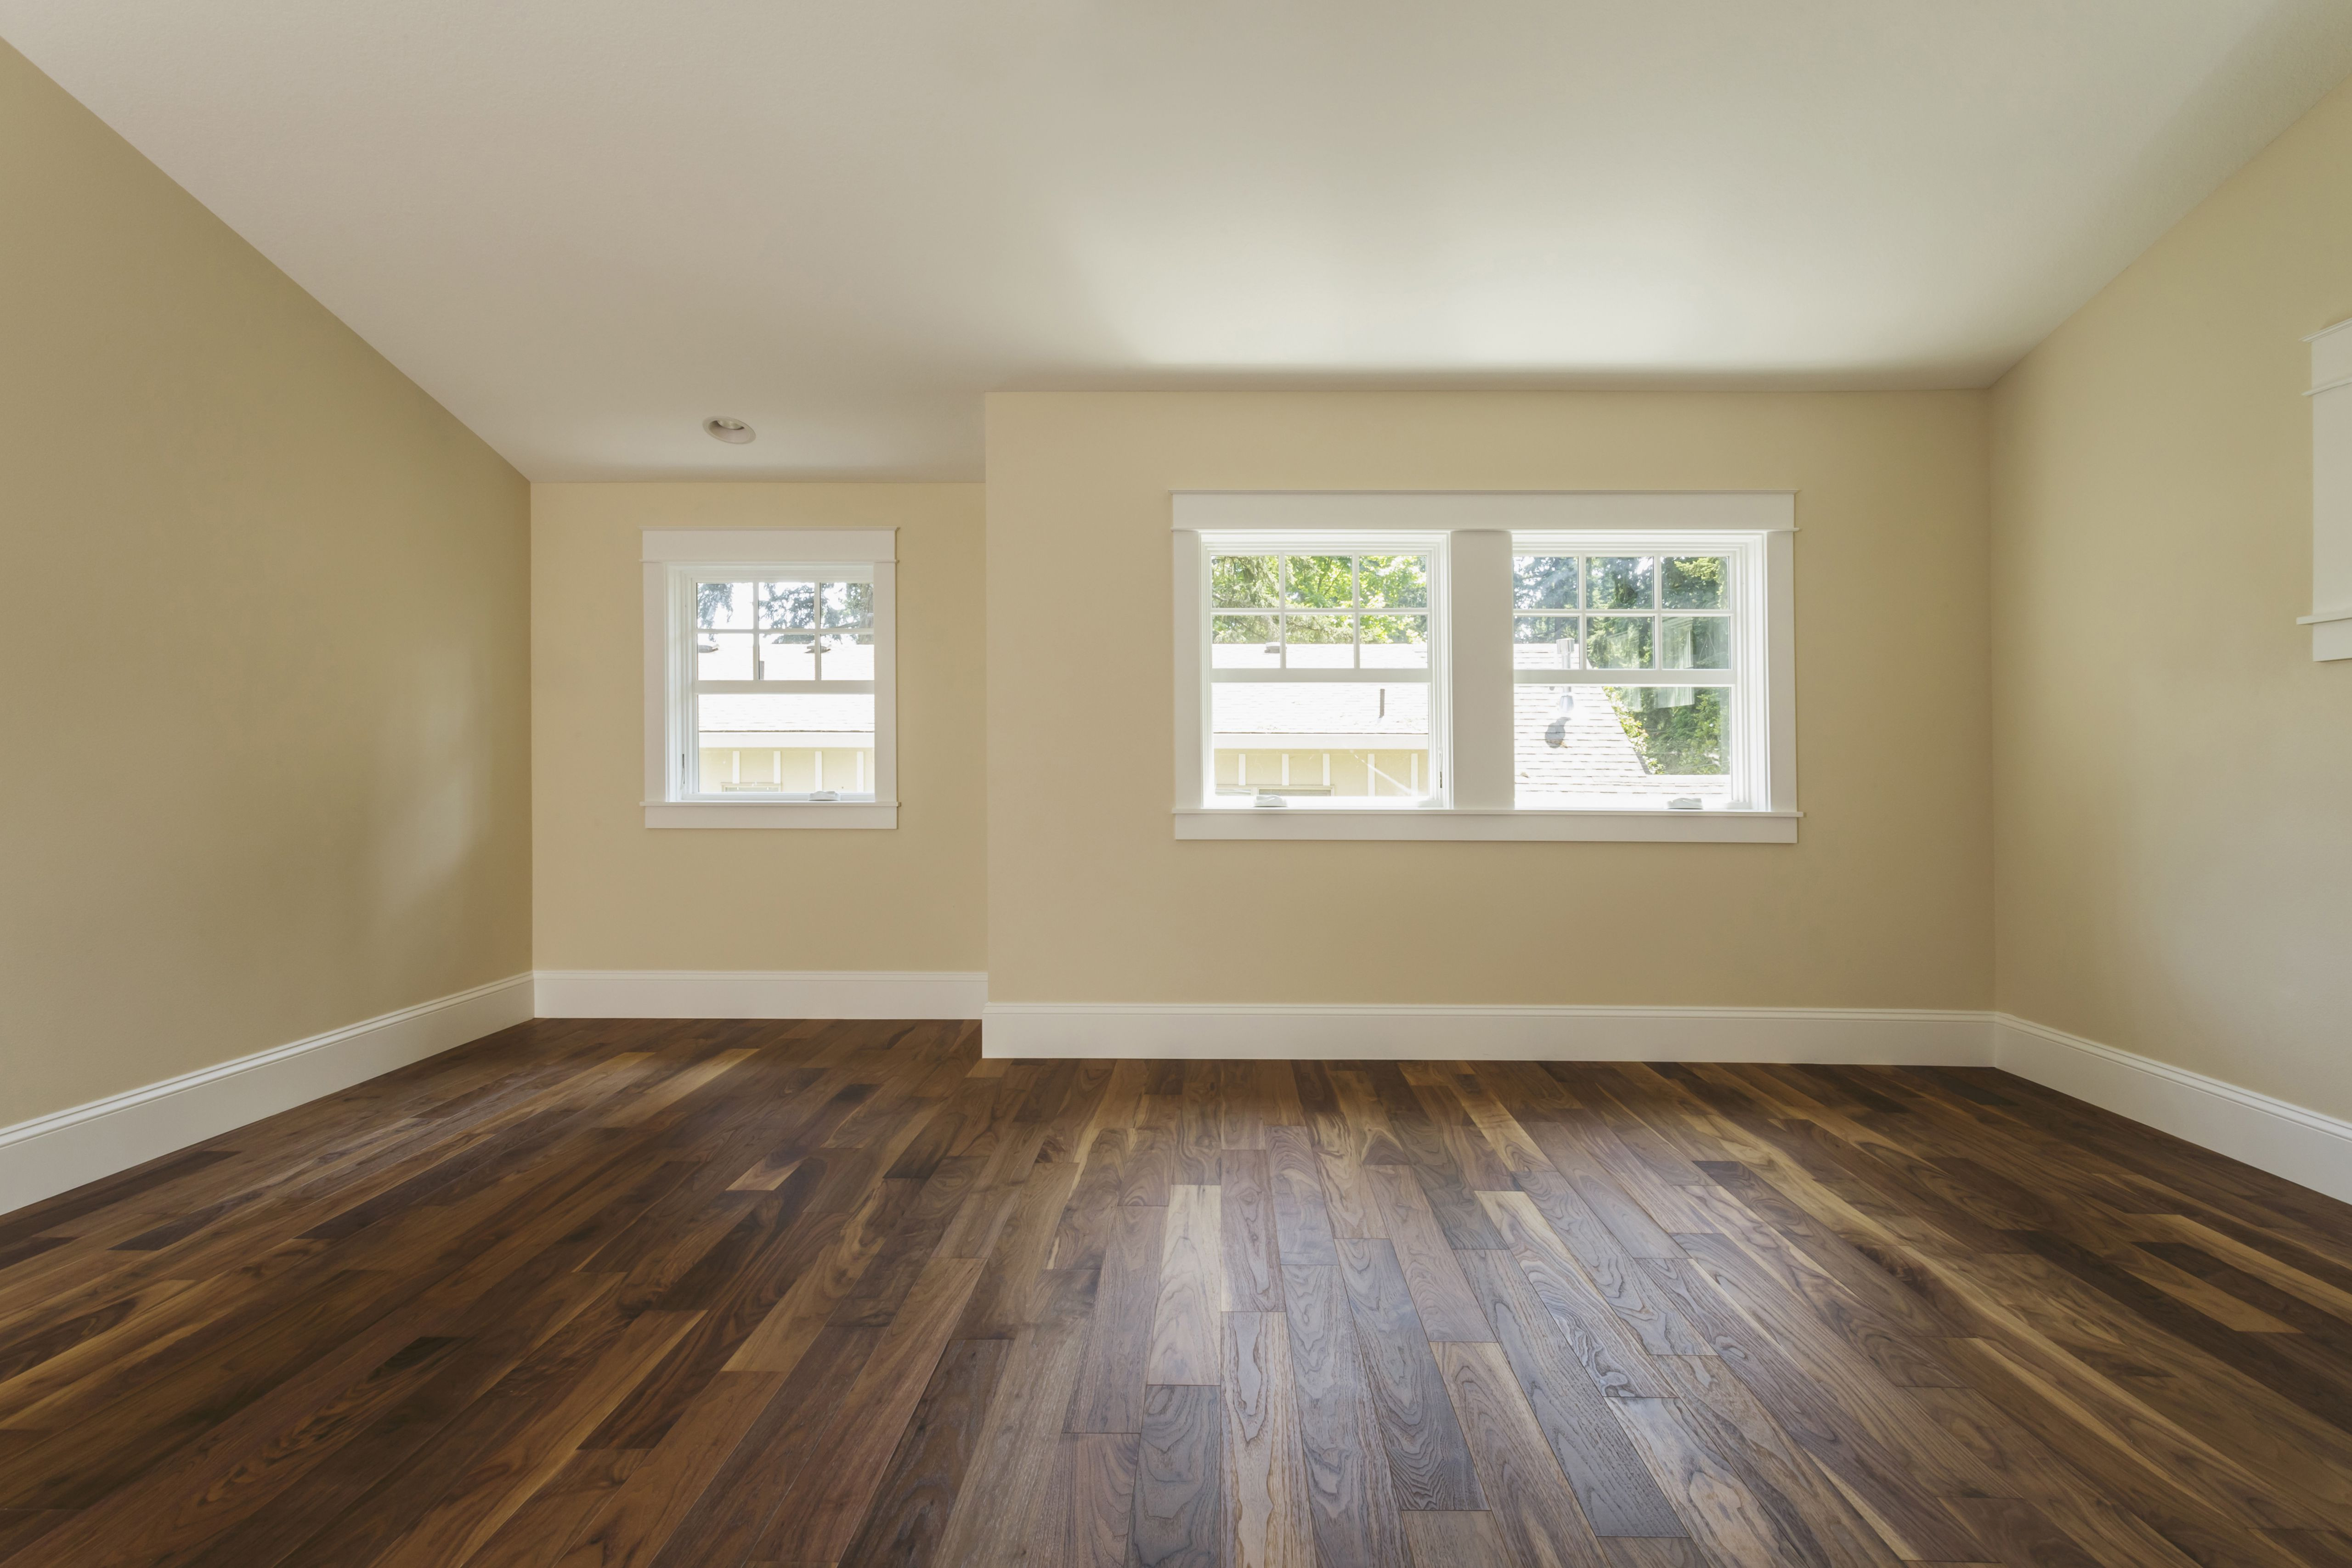 Hardwood Floor Refinishing Idaho Falls Of How to Lay A Floating Floor It S Easy and Fast to Install Plank with How to Lay A Floating Floor It S Easy and Fast to Install Plank Vinyl Flooring